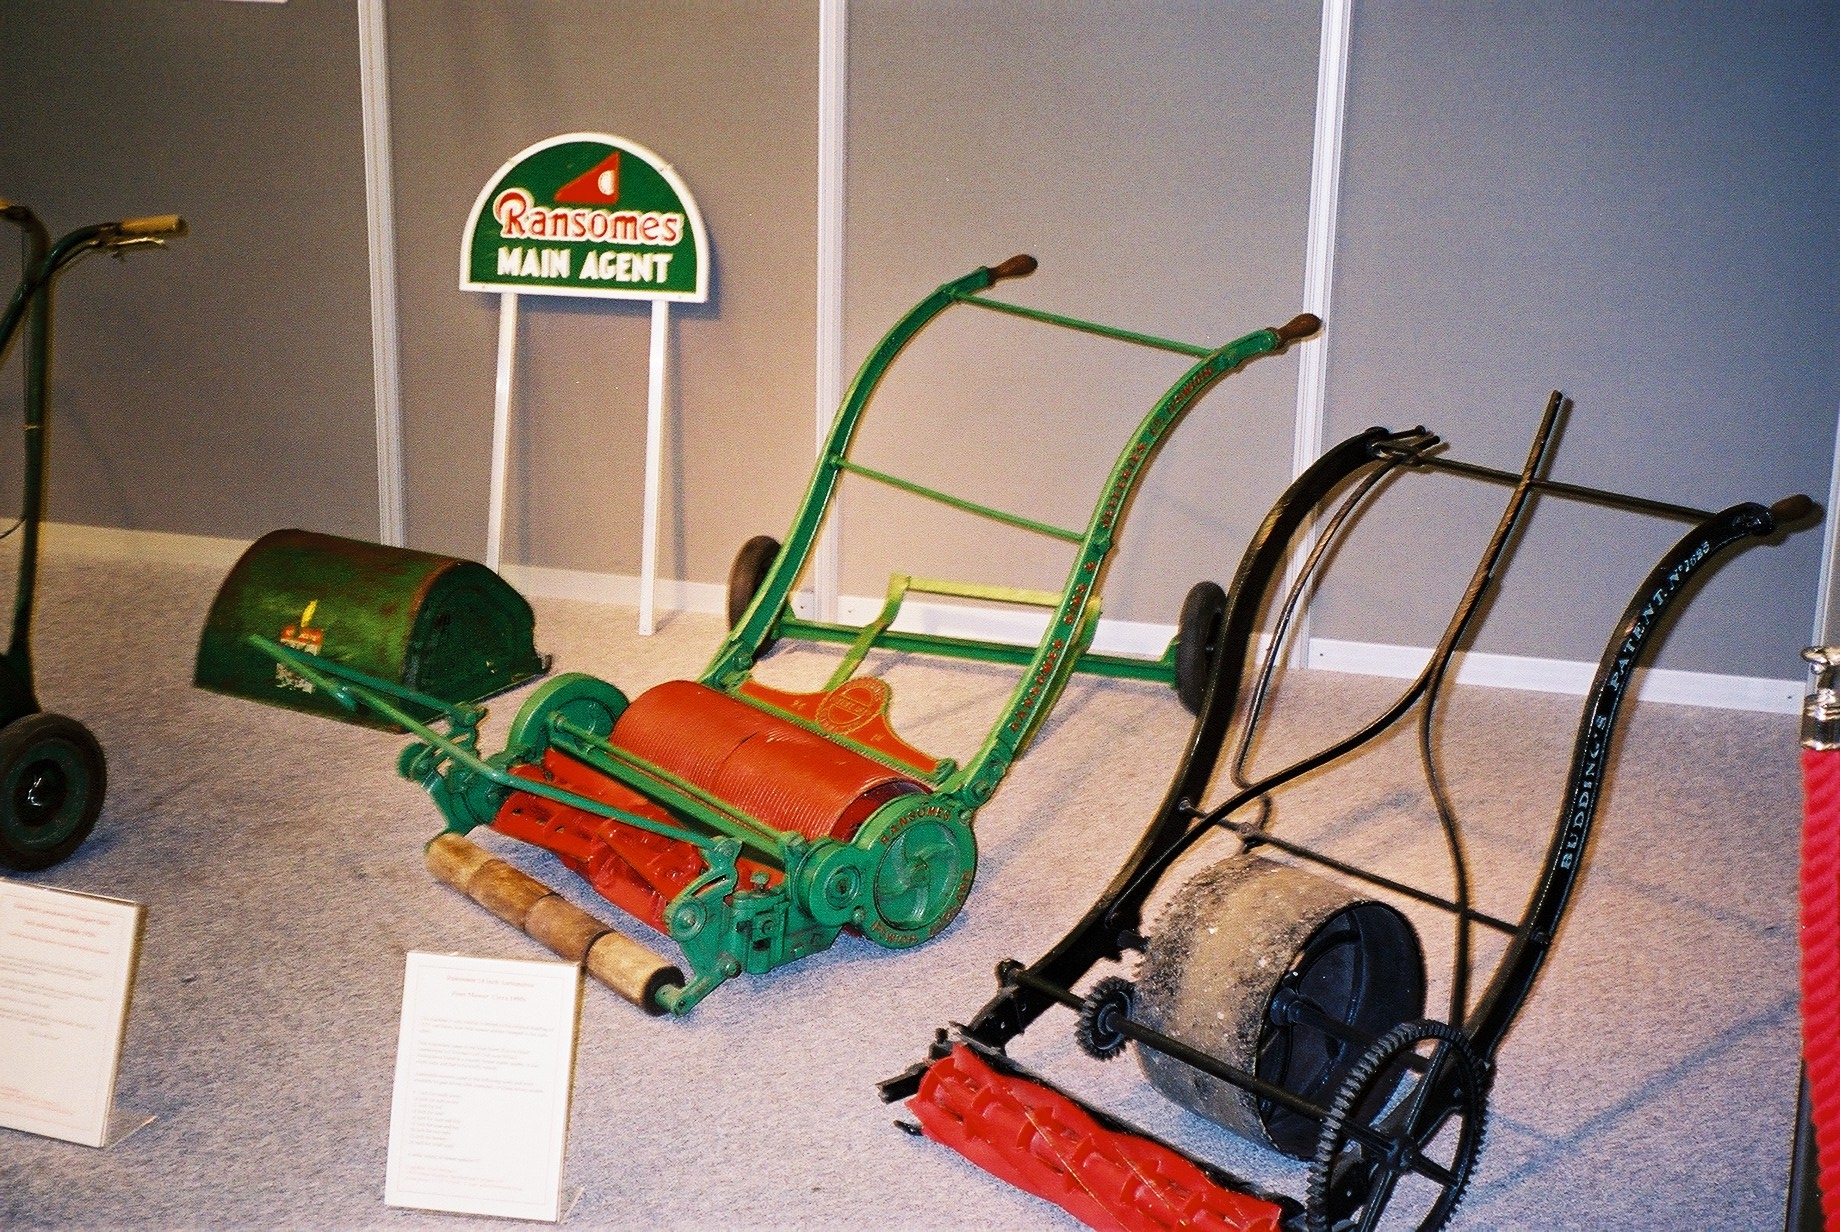 Ransomes Automaton 24 inch Pony mower with Budding (Ransomes owned)